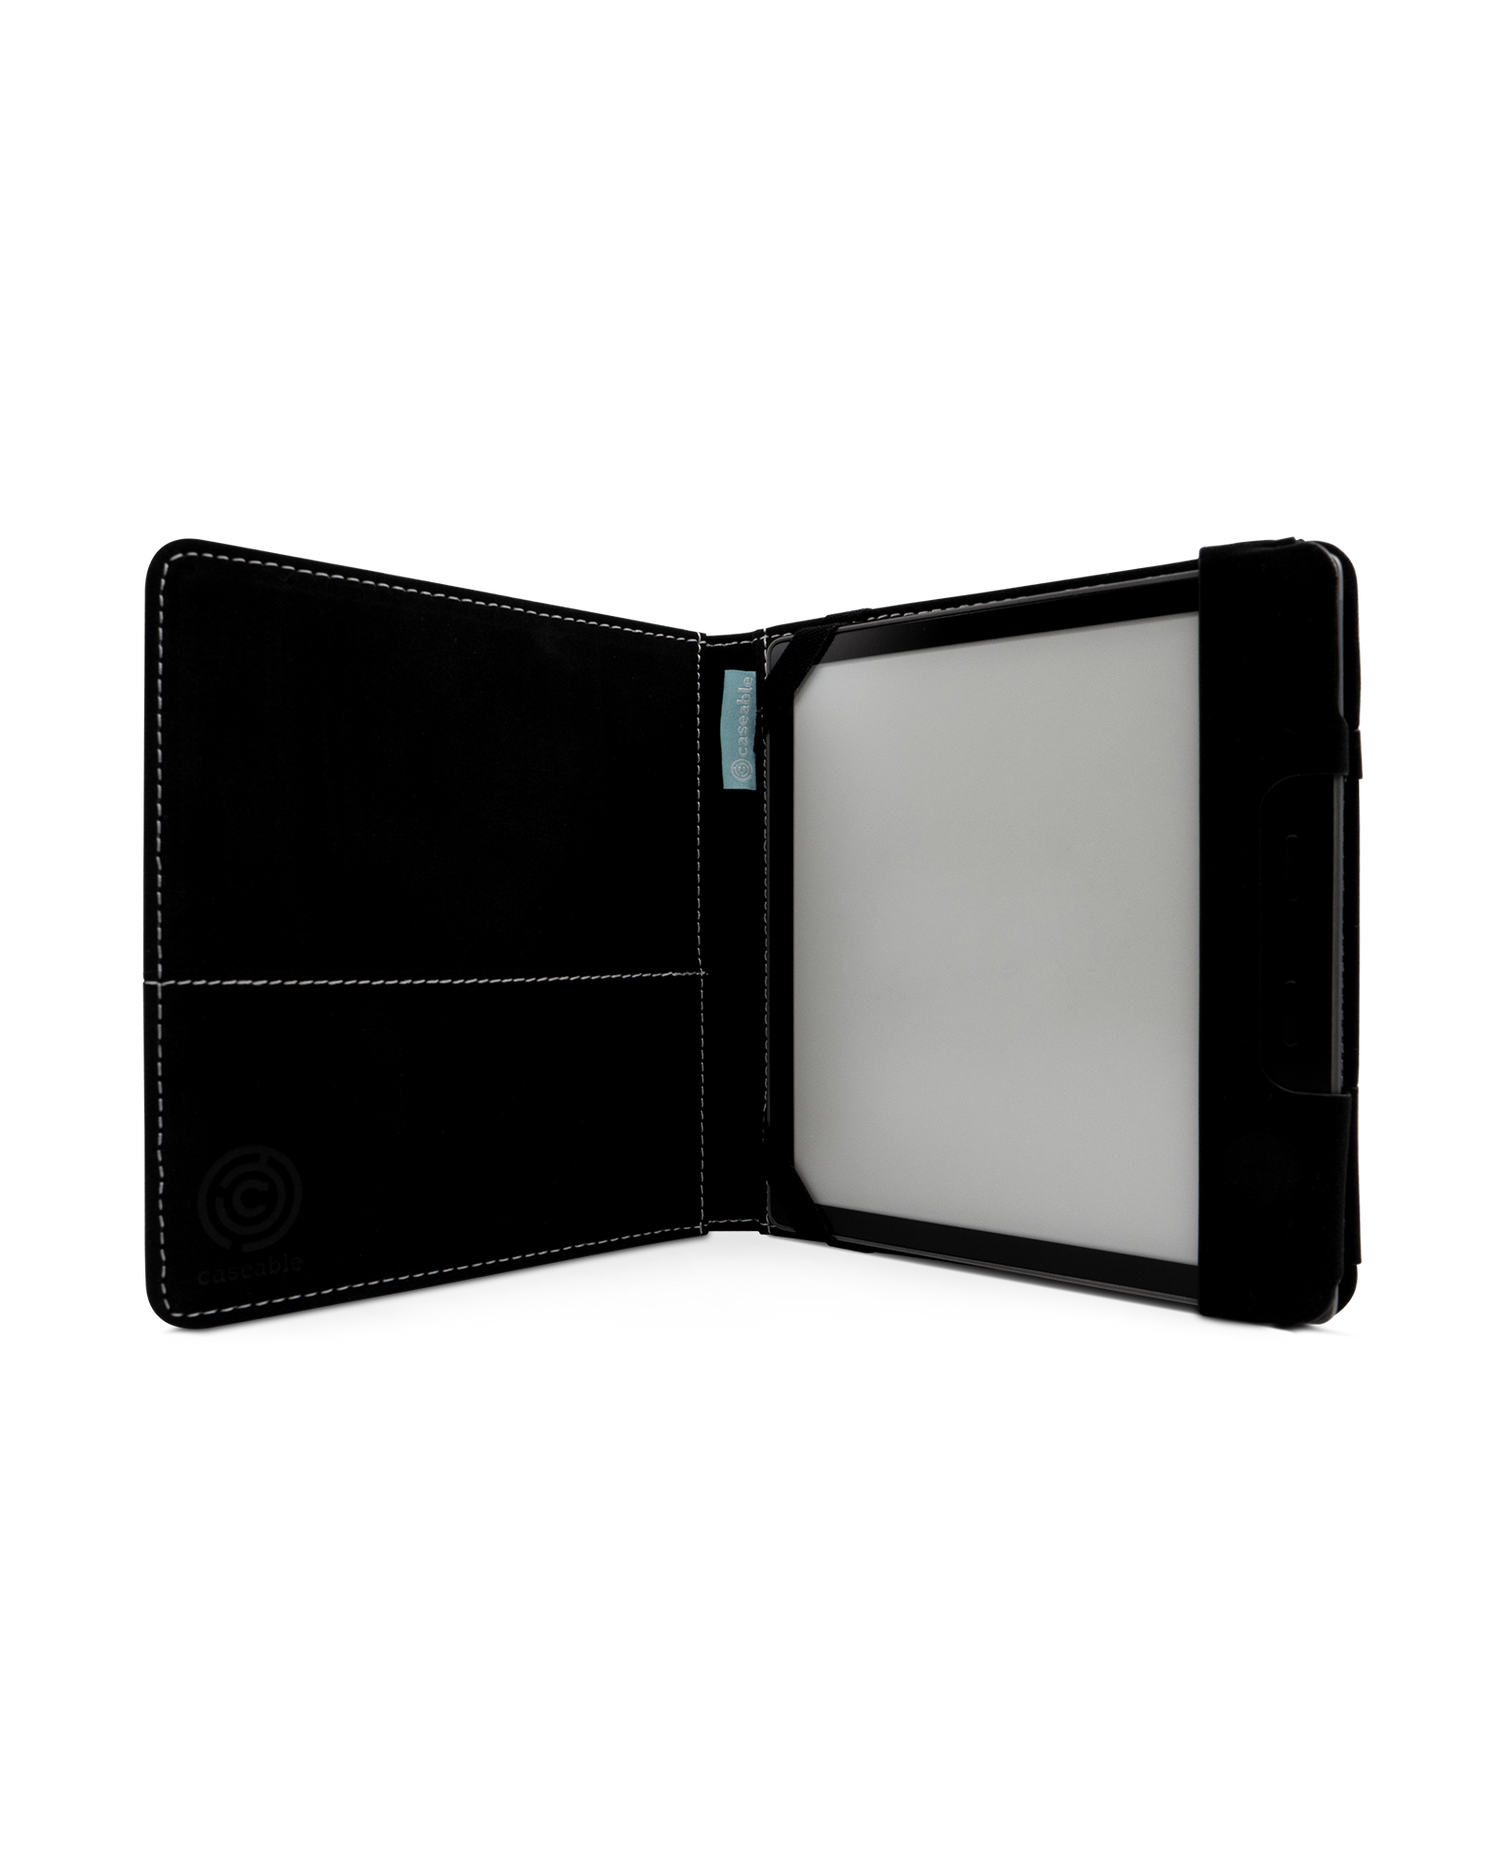 Orchid eReader Case for tolino vision 6: Opened interior view